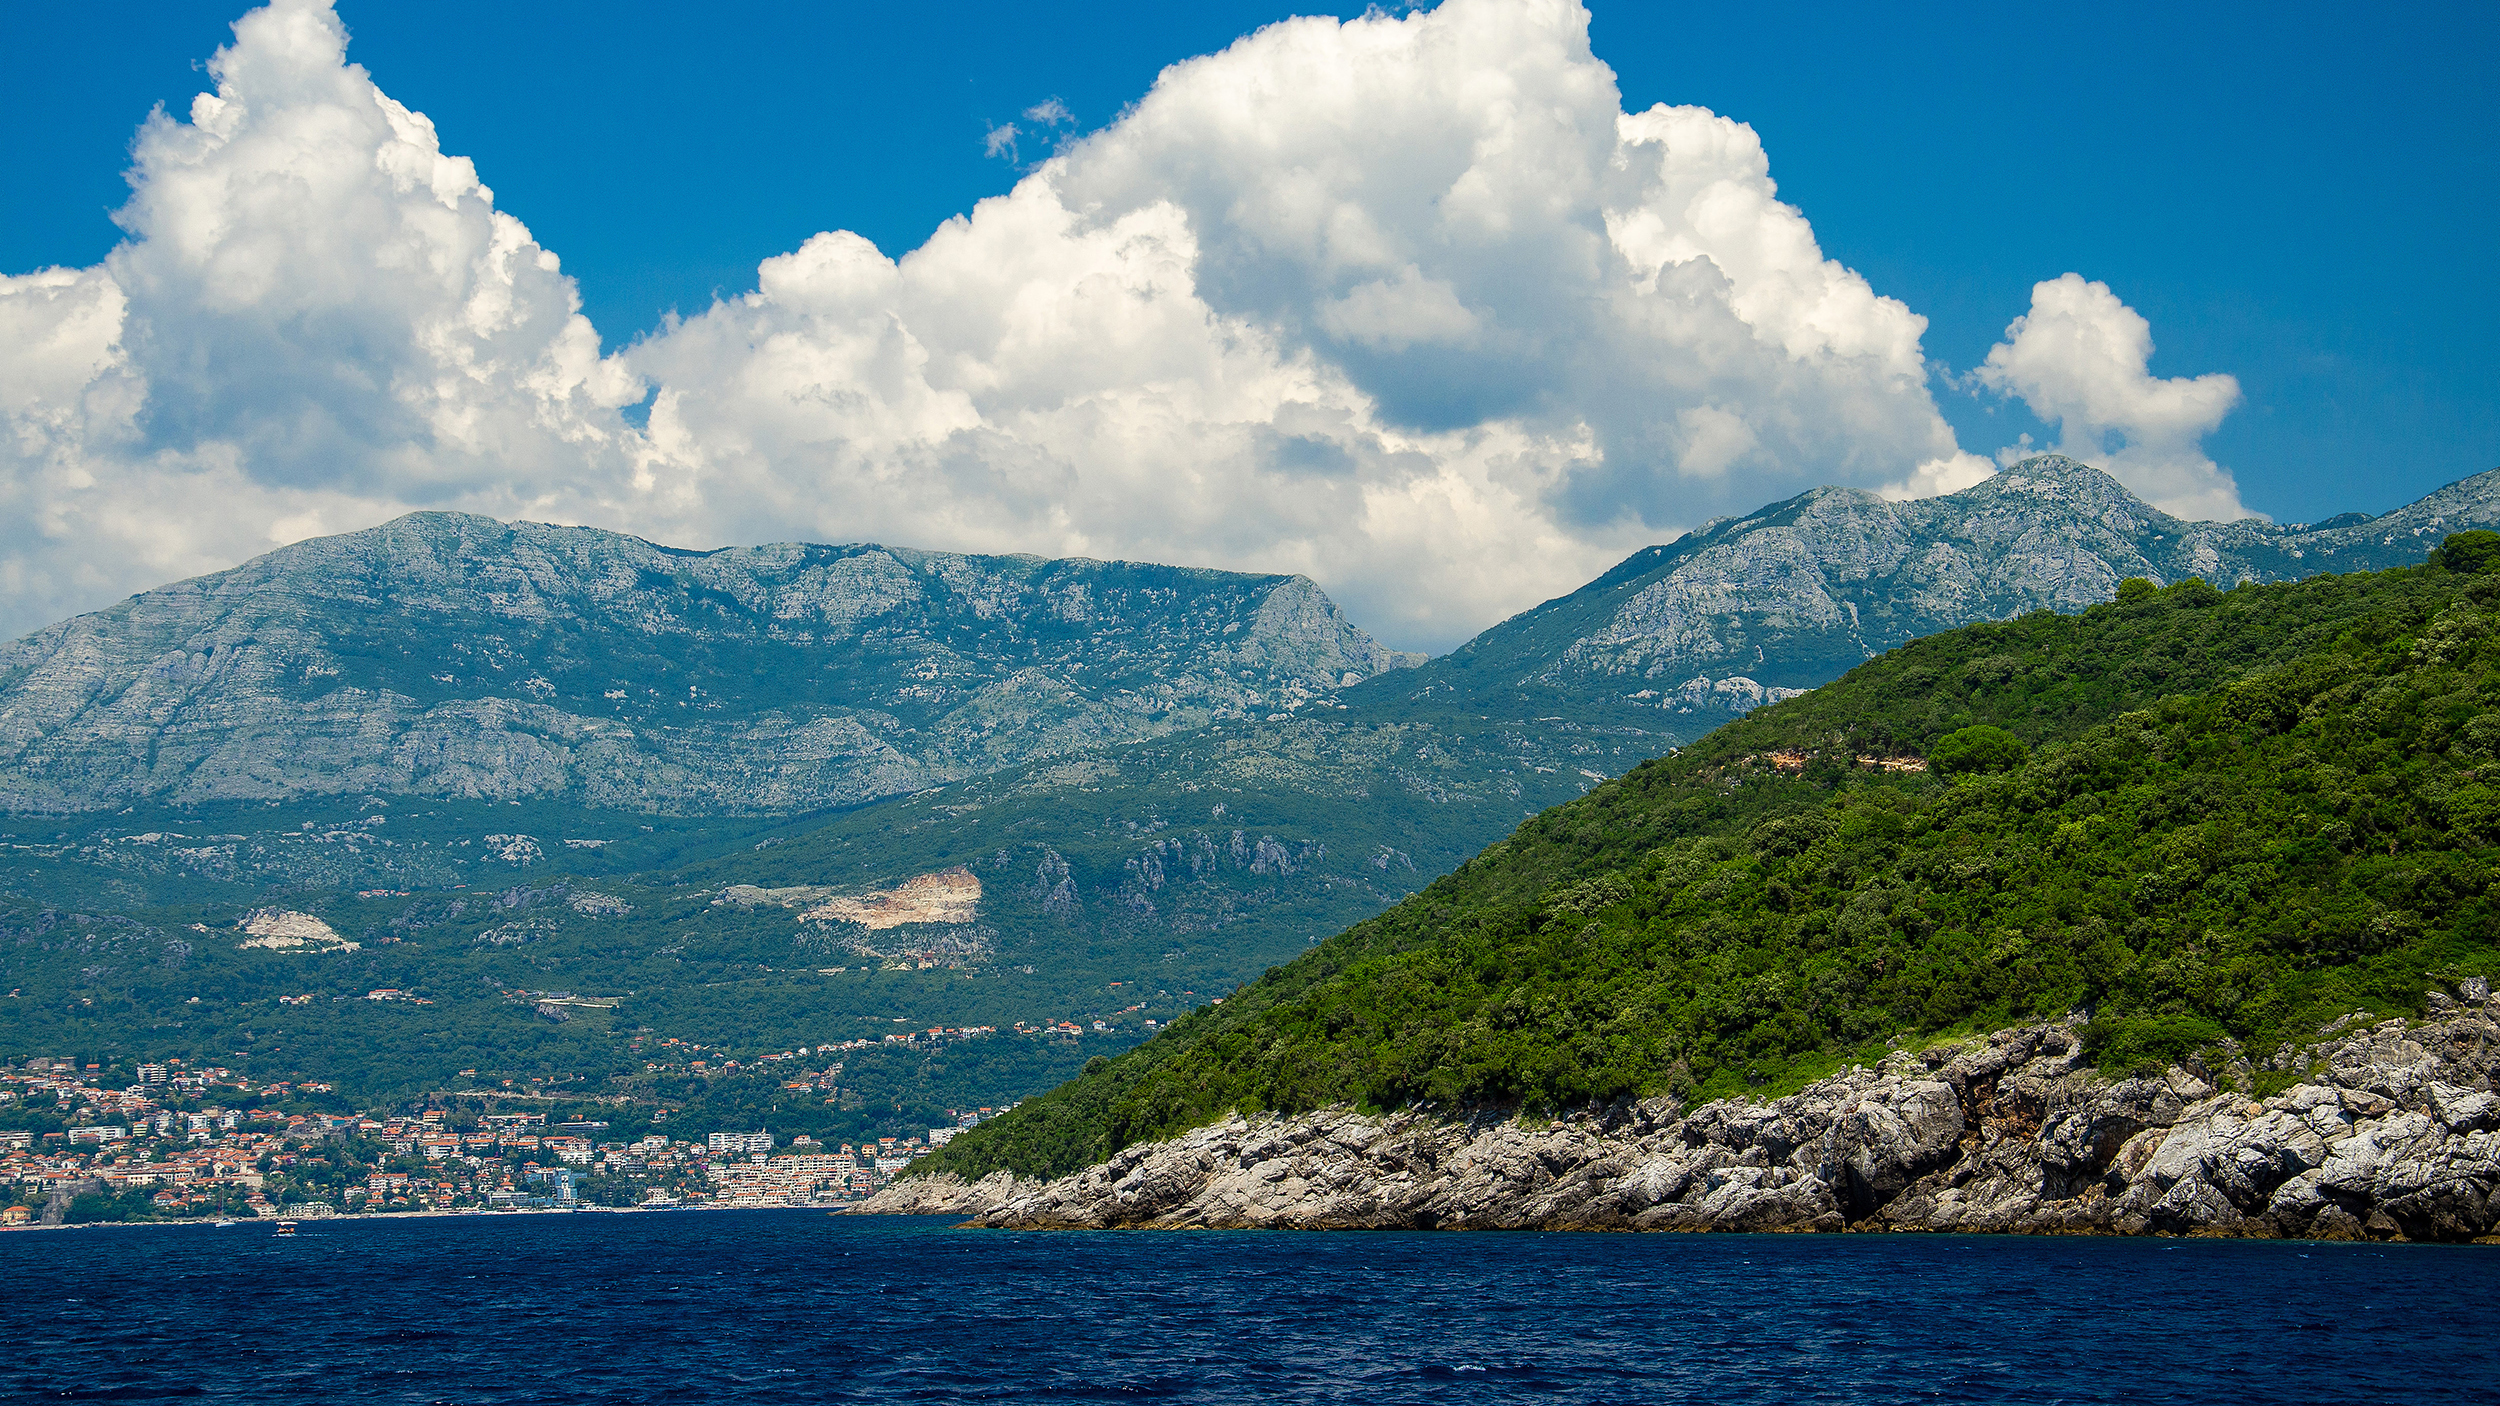 View of Boka Kotor bay water, town of Herceg Novi and Mount Orjen of Dinaric Alps mountain range in front of blue sky with white clouds, Montenegro